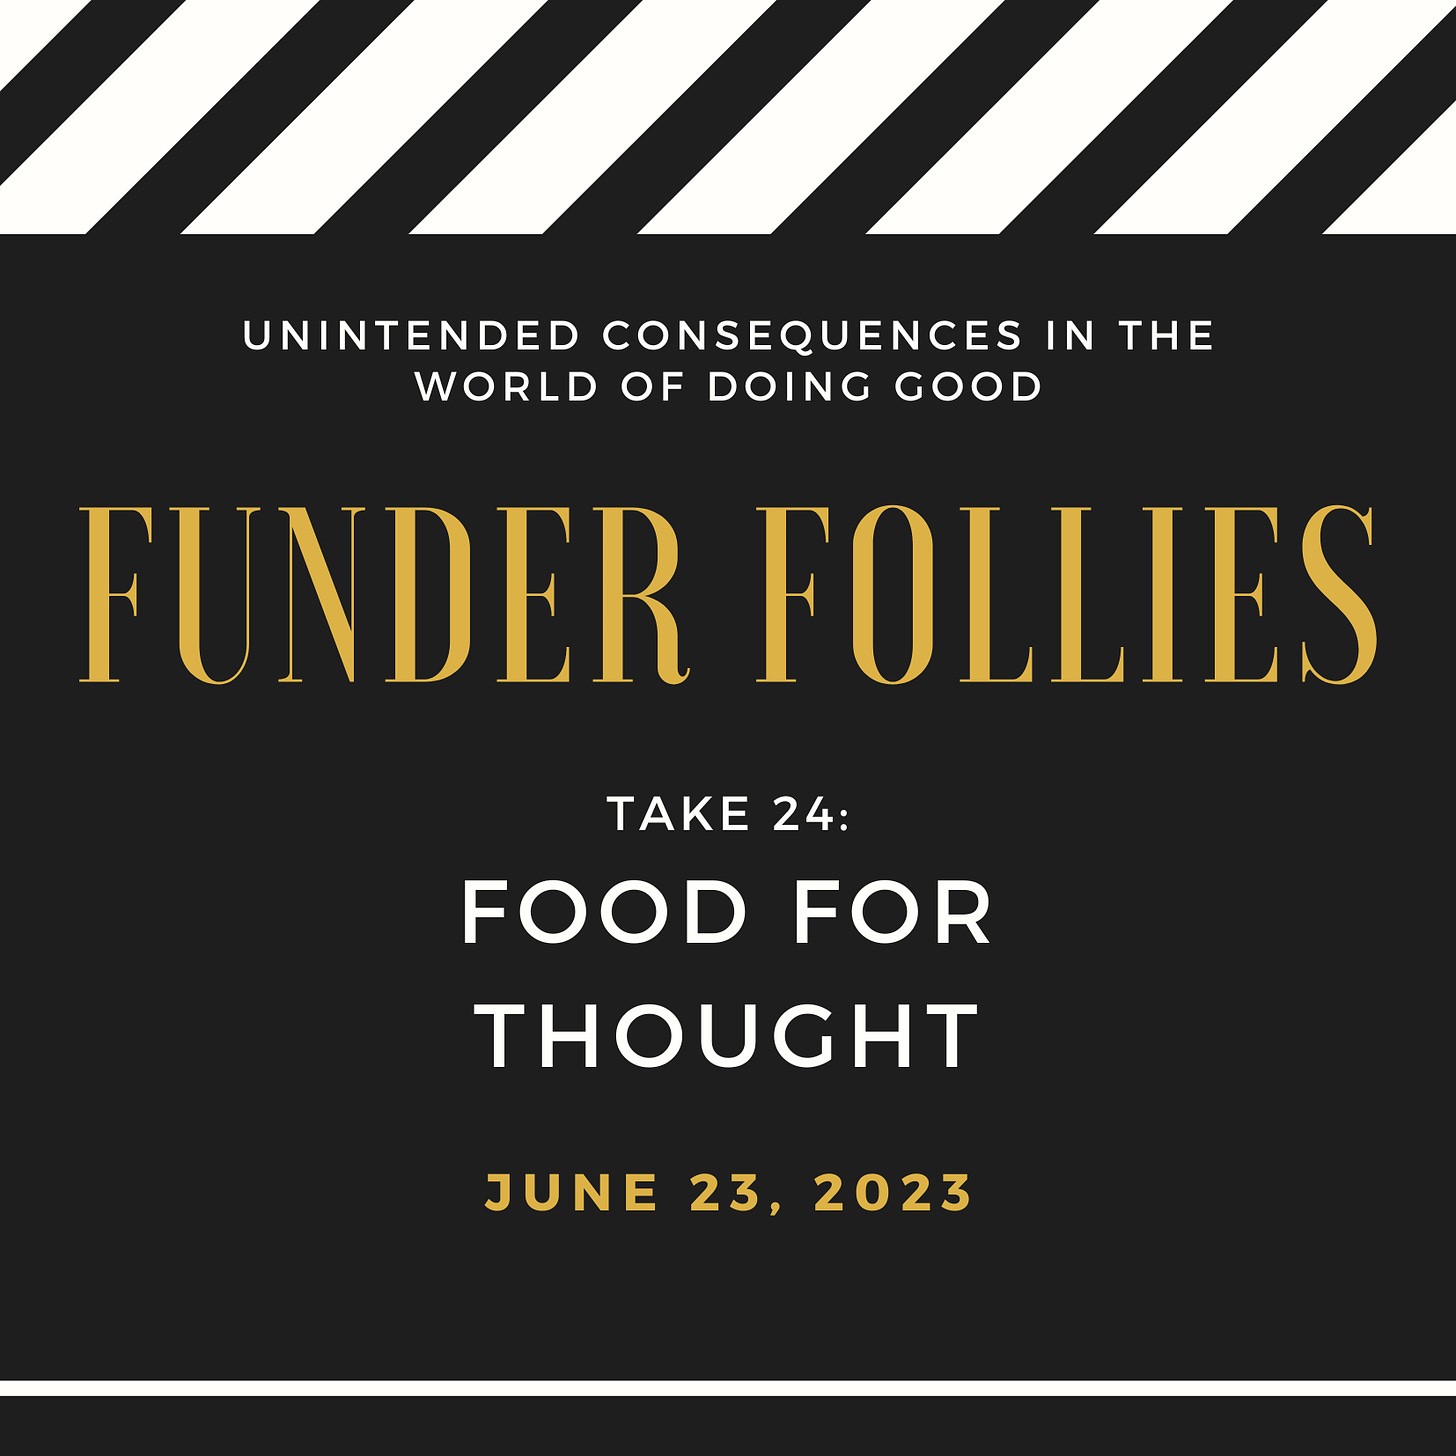 Black and white movie clapper board with "Funder Follies Take 24_Food for Thought" Issue for June 23, 2023